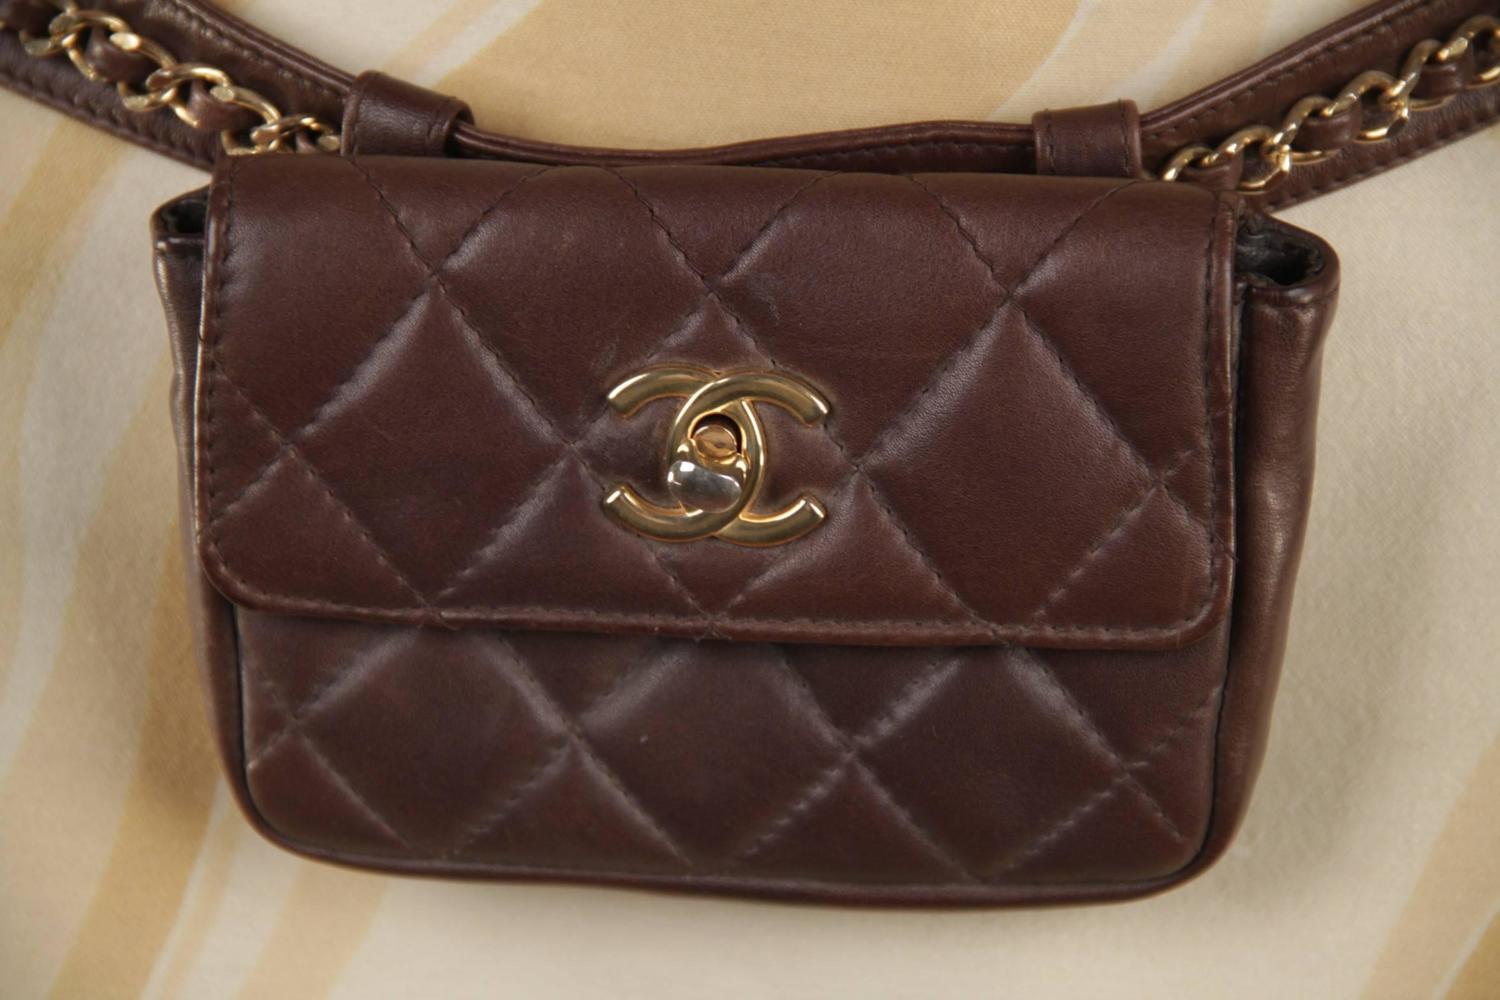 CHANEL Vintage Brown QUILTED Leather WAIST PURSE with Golden CHAIN BELT at 1stdibs